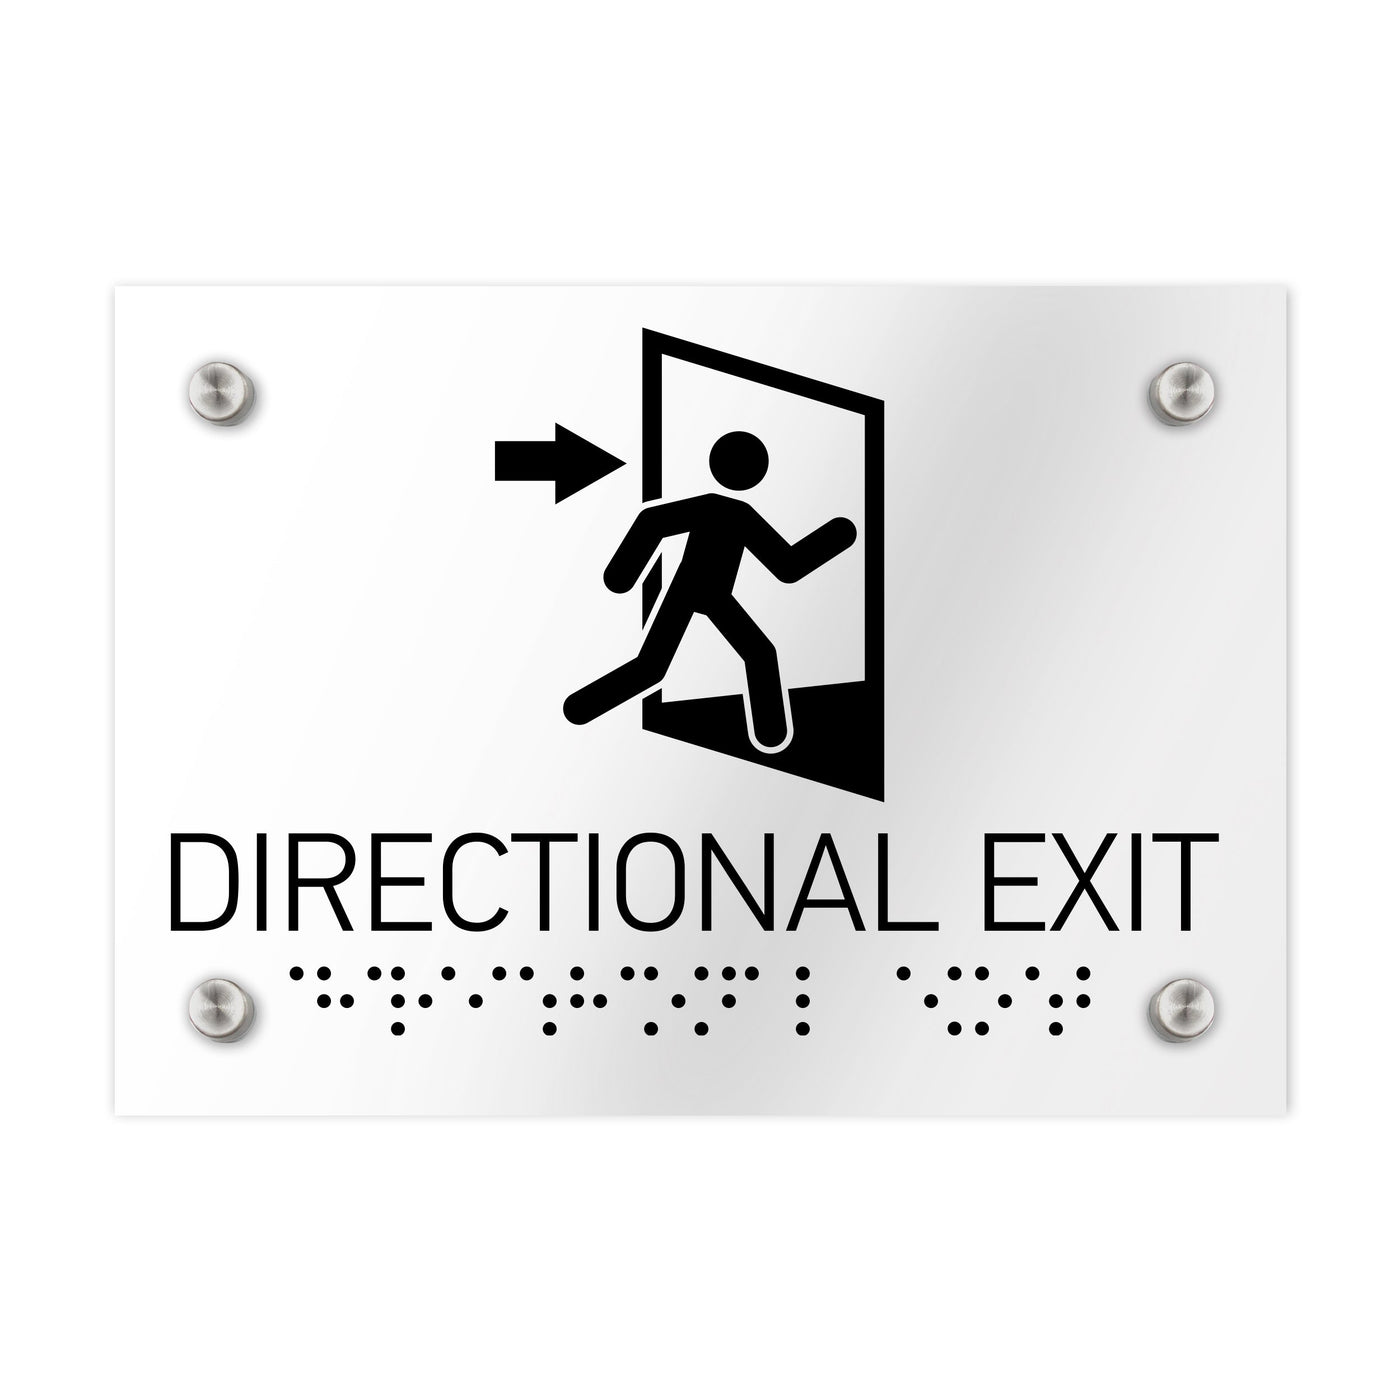 Information Signs - Directional Exit Door Sign Clear Acrylic Whith Braille